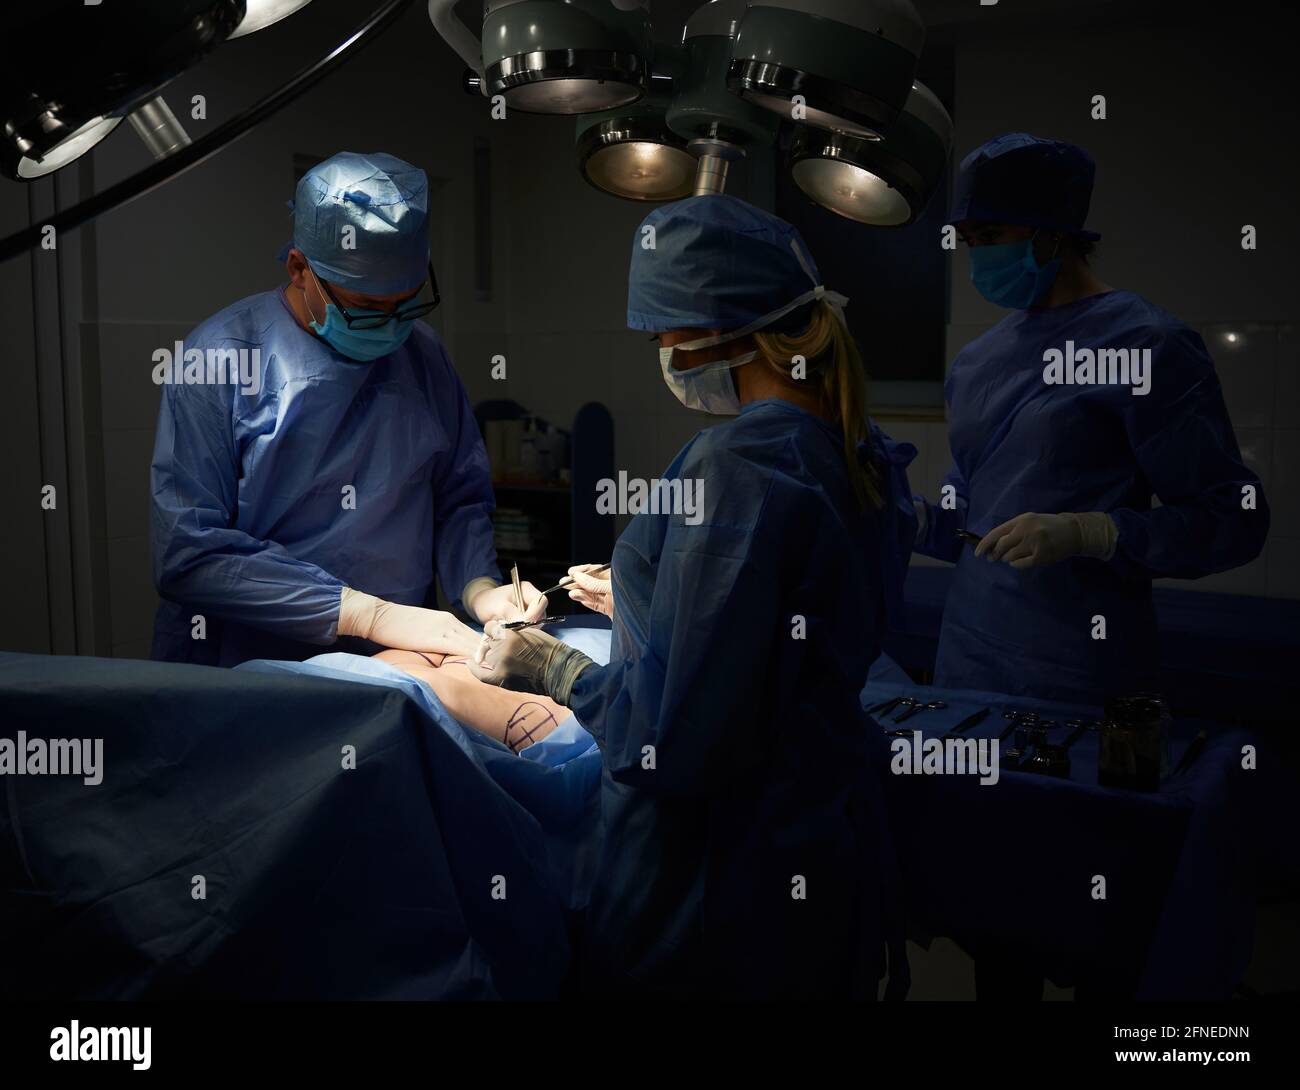 Medical team doing aesthetic plastic surgery in operating room with dim light. Surgeon and assistants performing cosmetic surgery and using medical instruments. Concept of medicine and plastic surgery Stock Photo